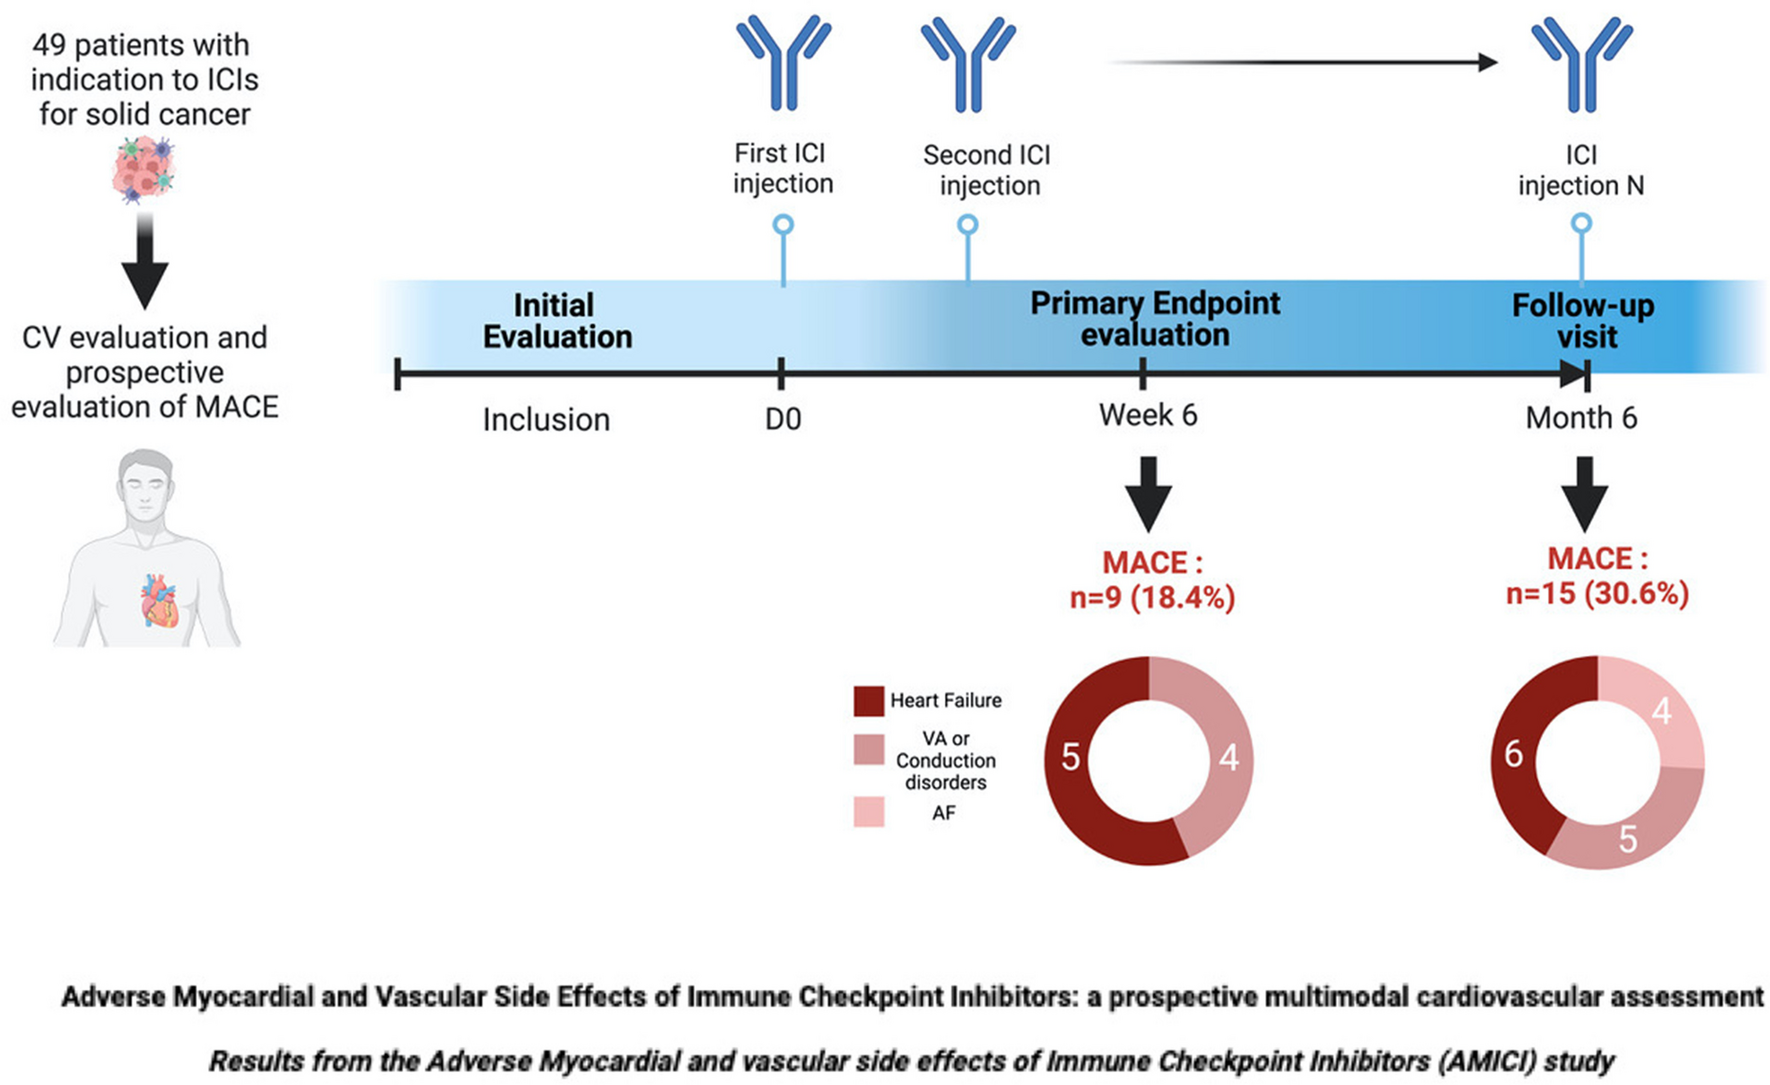 Adverse myocardial and vascular side effects of immune checkpoint inhibitors: a prospective multimodal cardiovascular assessment